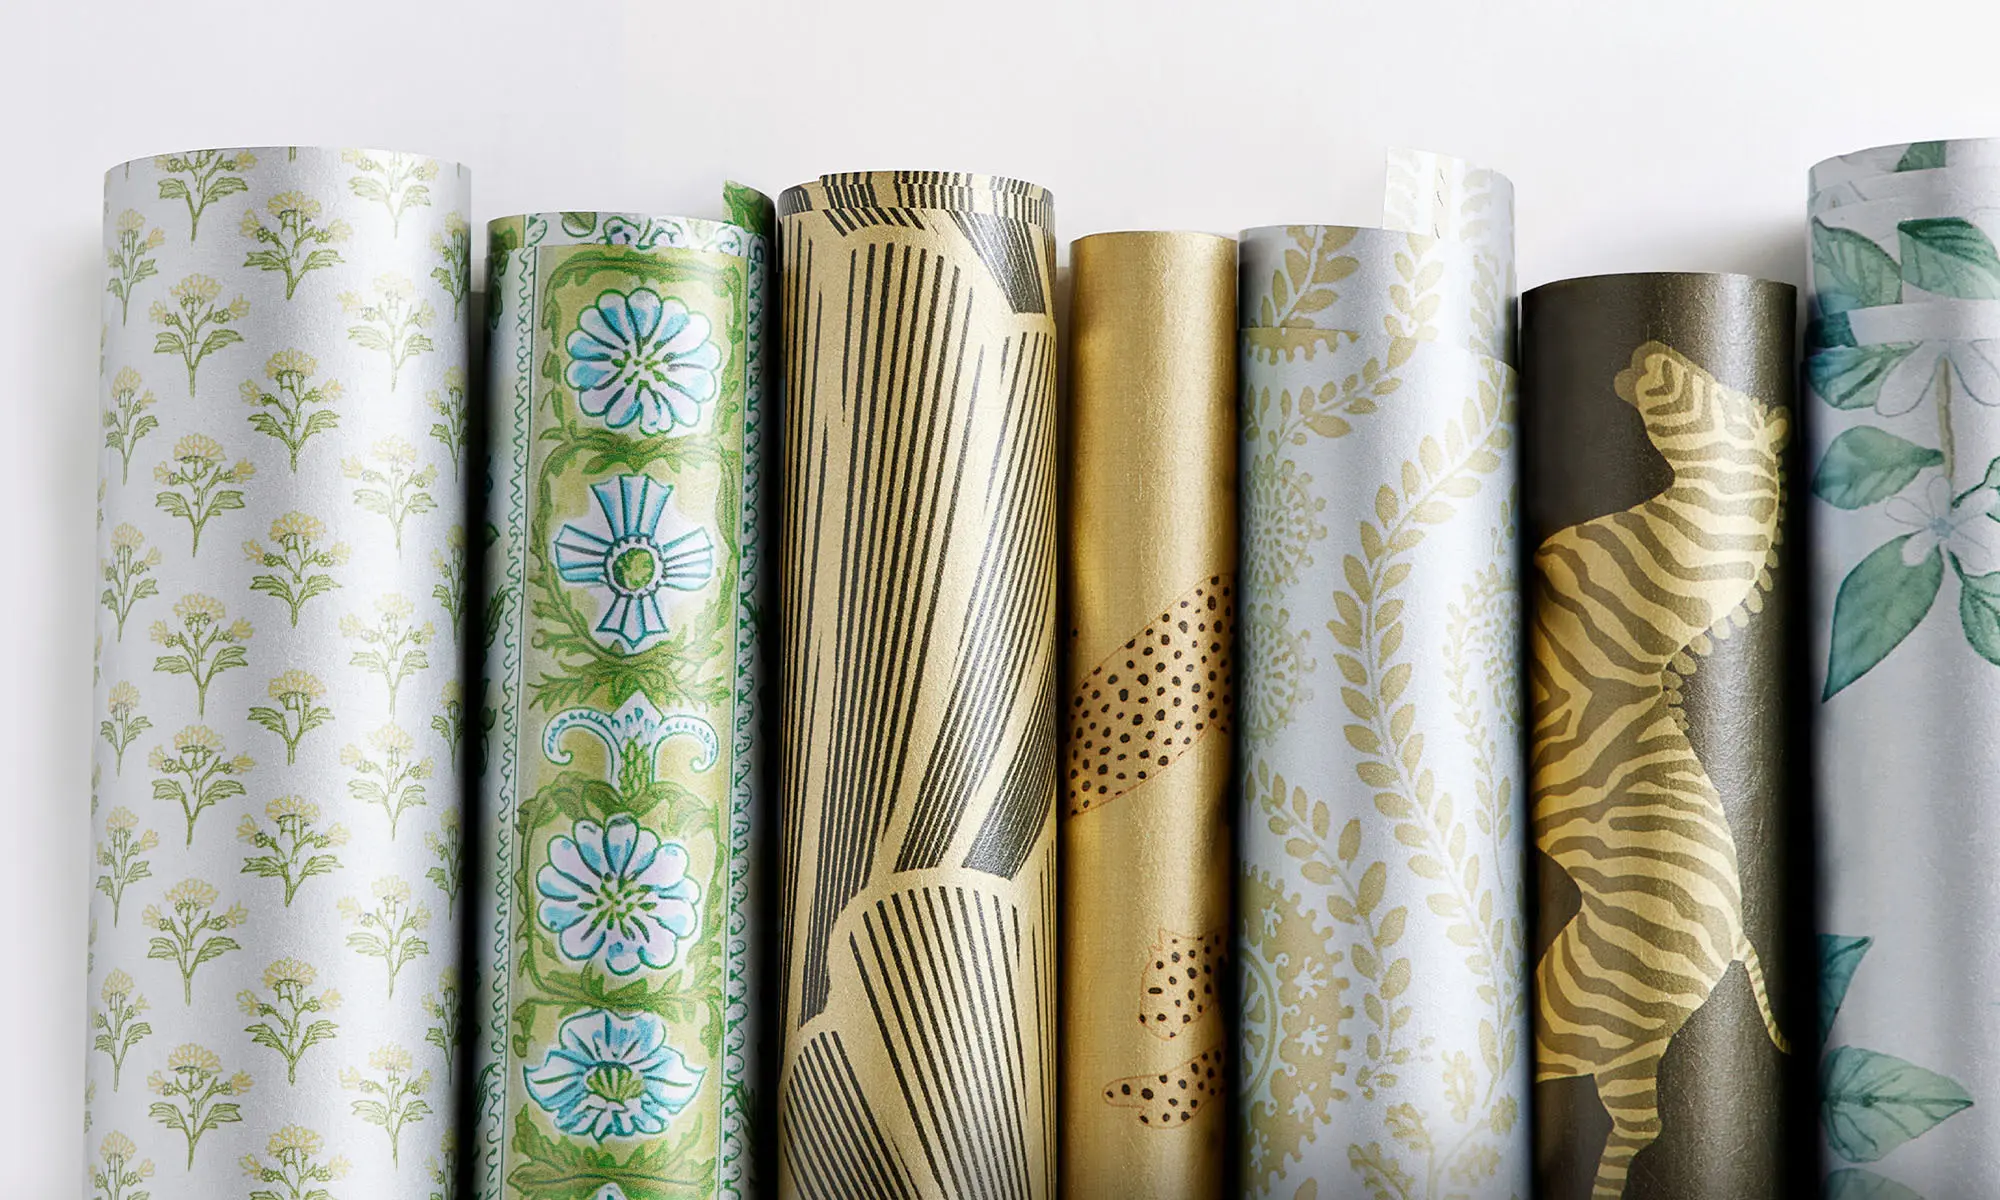 Rolls of metallic gold and silver wallpaper.